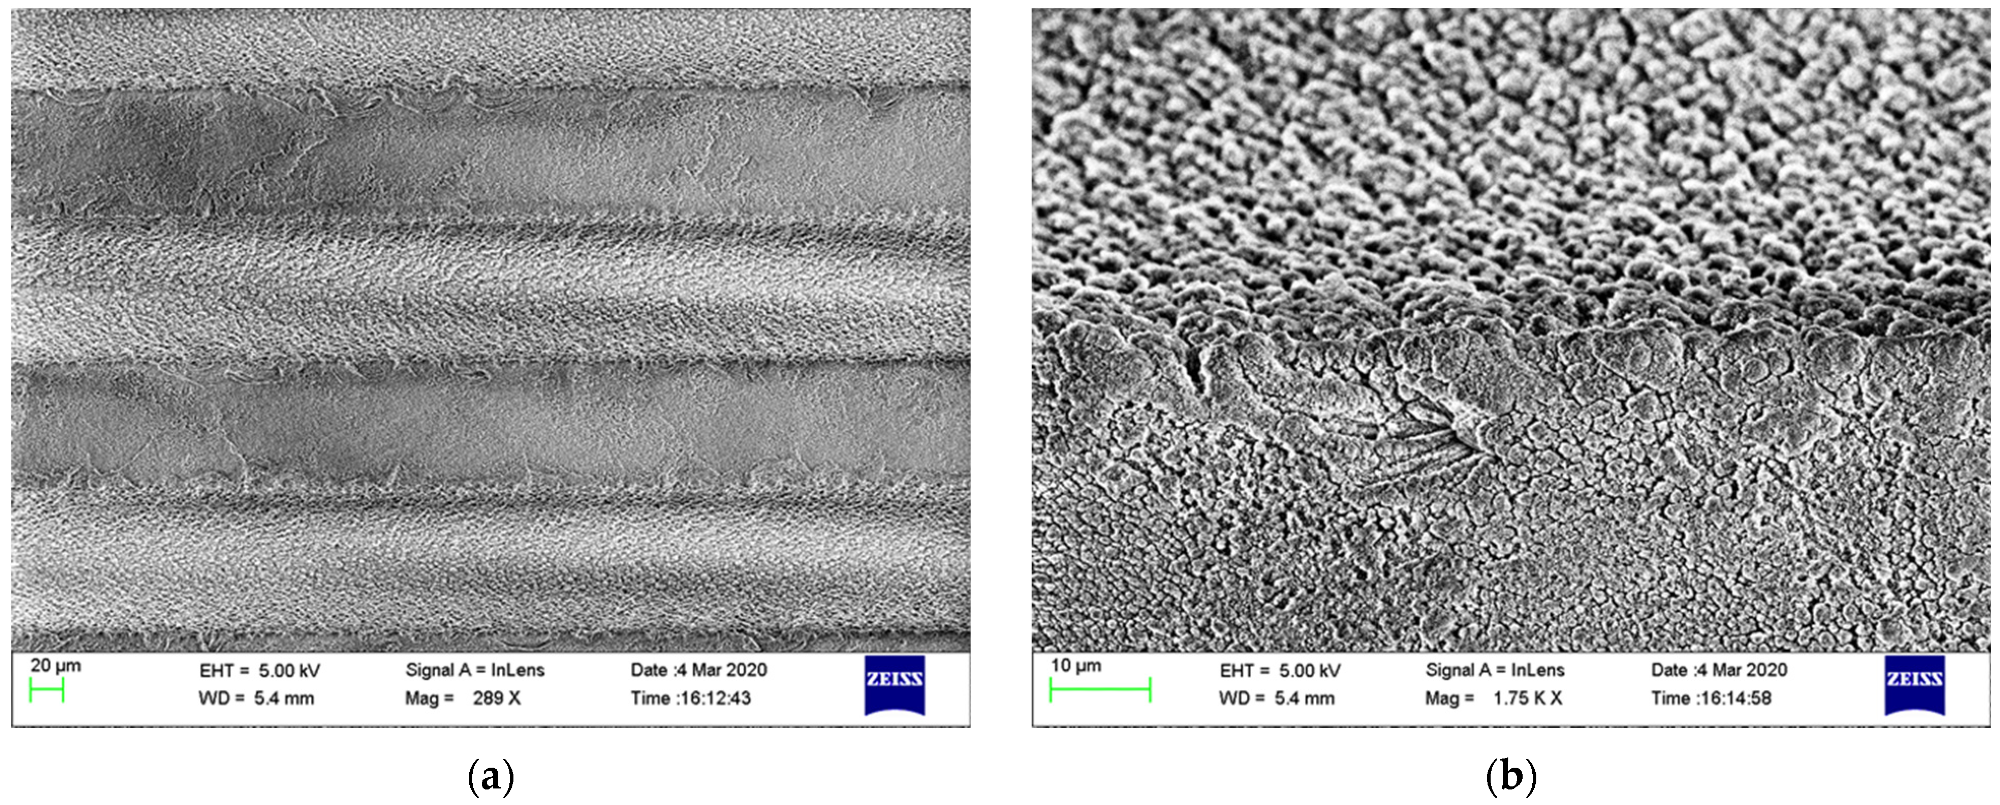 (a,b) SEM images of patterned SiO2/gold diffraction grating, where (b) demonstrates the groove interface. (c) AFM of the plane SiO2 surface covered with gold. (d) Raman spectra of CVD graphene used for metasurface fabrication.